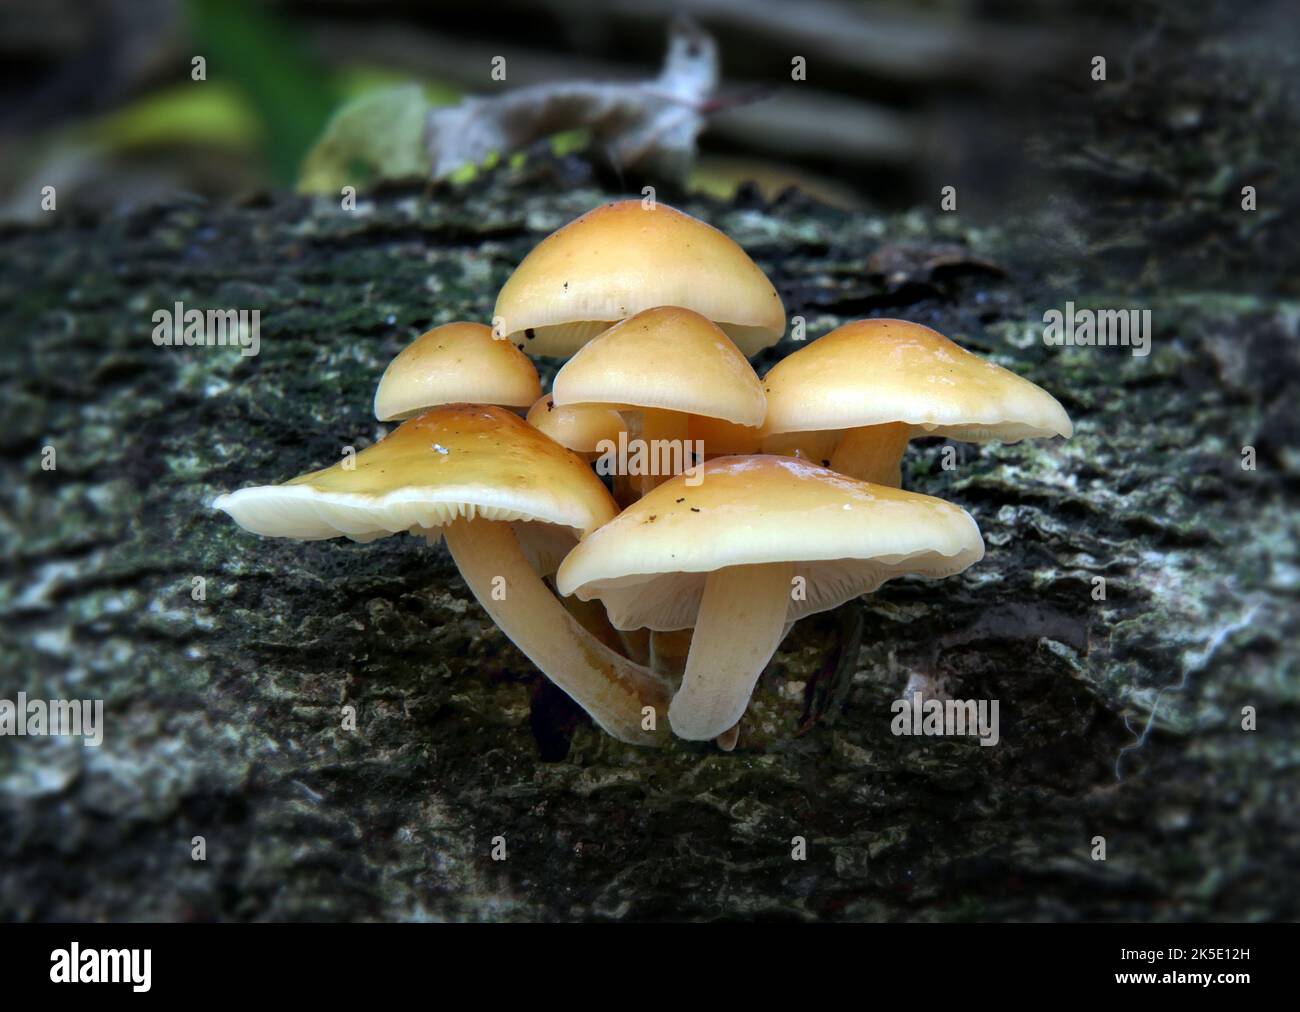 Flammulina velutipes is a species of agaric (gilled mushroom) in the family Physalacriaceae. In the UK, it has been given the recommended English name of velvet shank. Here photographed in woodland in New Zealand, where mycologists there consider F. velutipes as a distinct variety. Credit: BSpragg Stock Photo